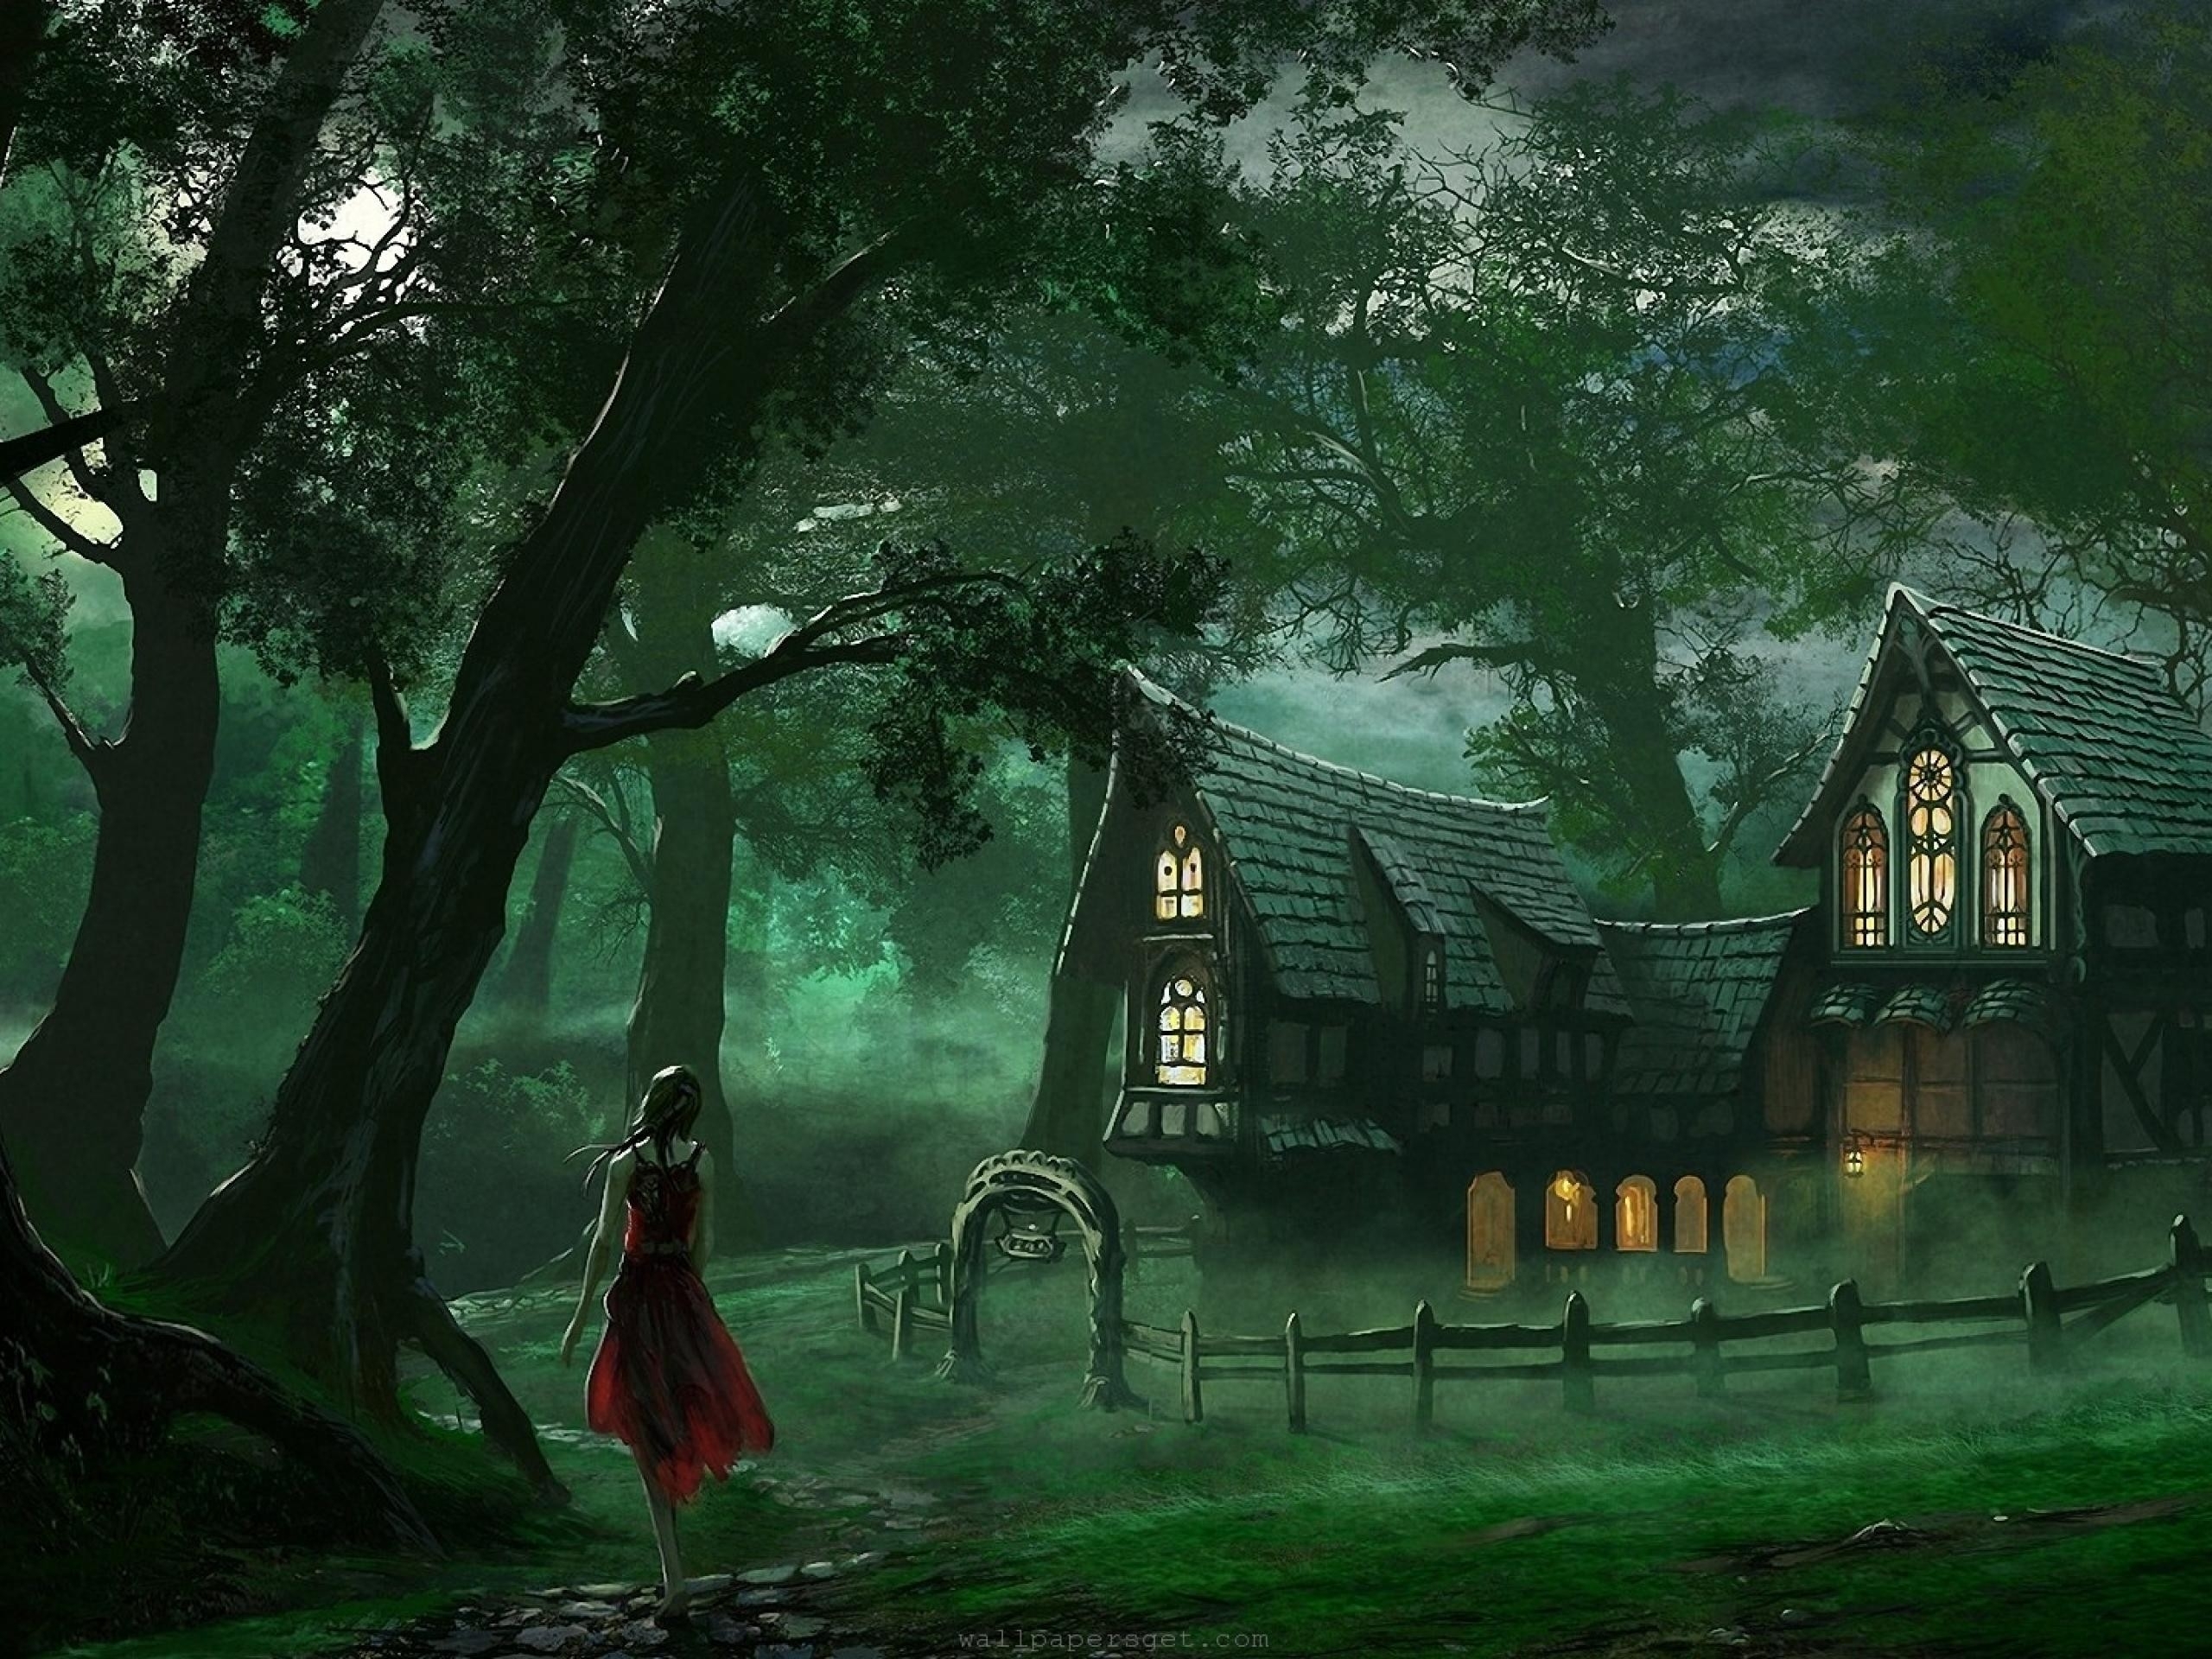 art, Artistic, Paintings, Fantasy, Mood, Trees, Forest, Nature, Women, Females, Girls, Architecture, Buildings, Cottage, Window, Lights, Houses, Landscapes, Leave Wallpaper